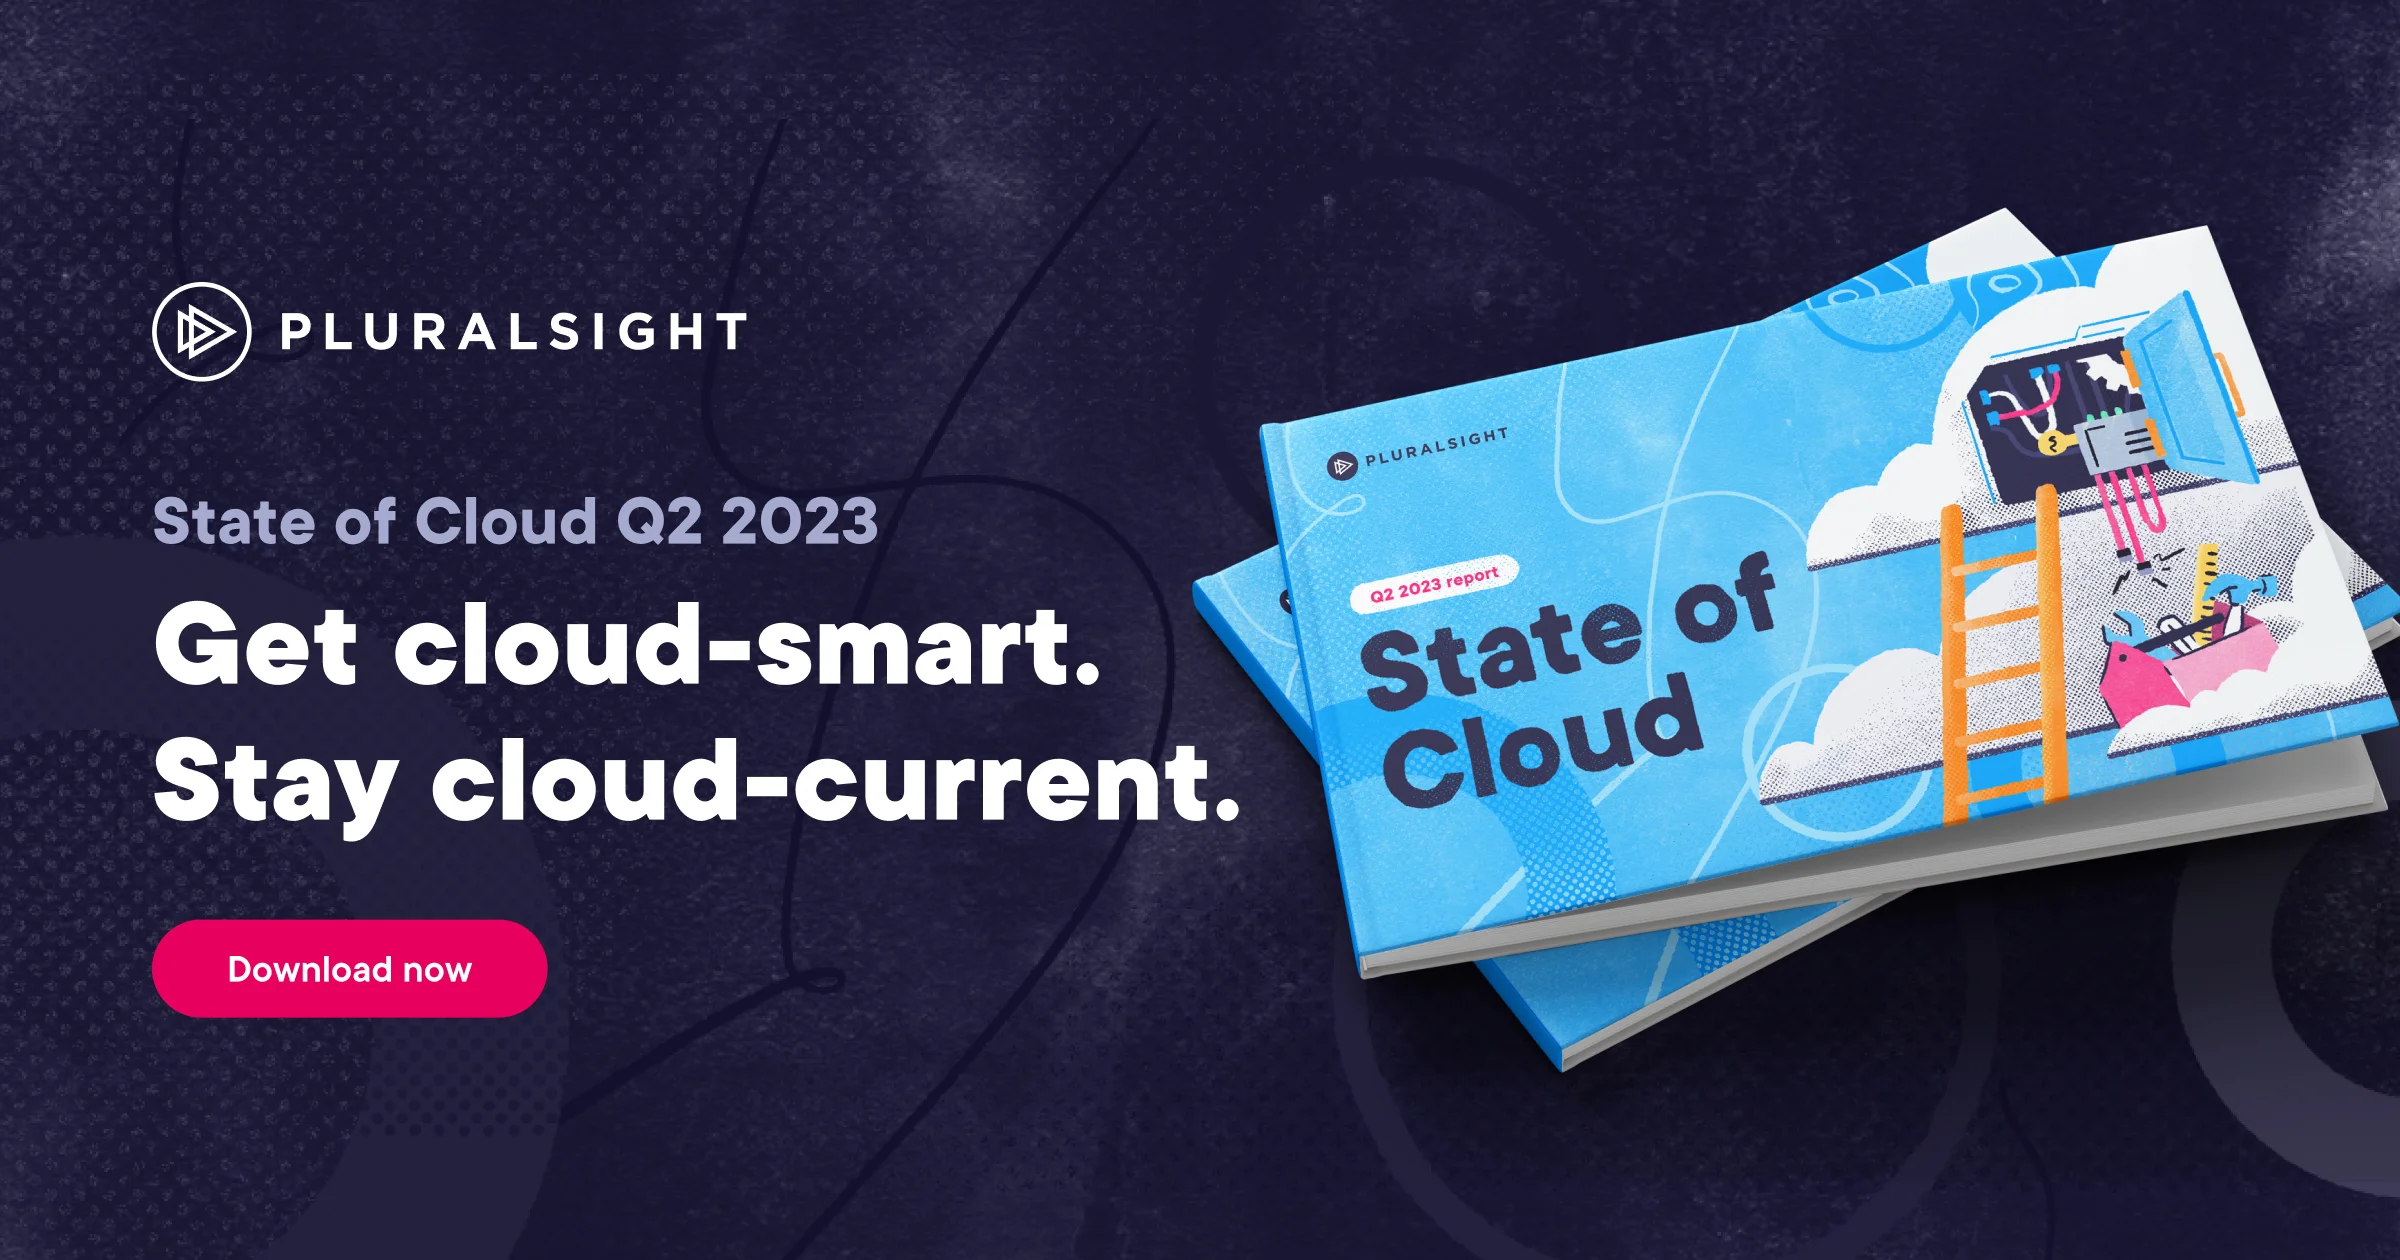 pluralsight state of the cloud